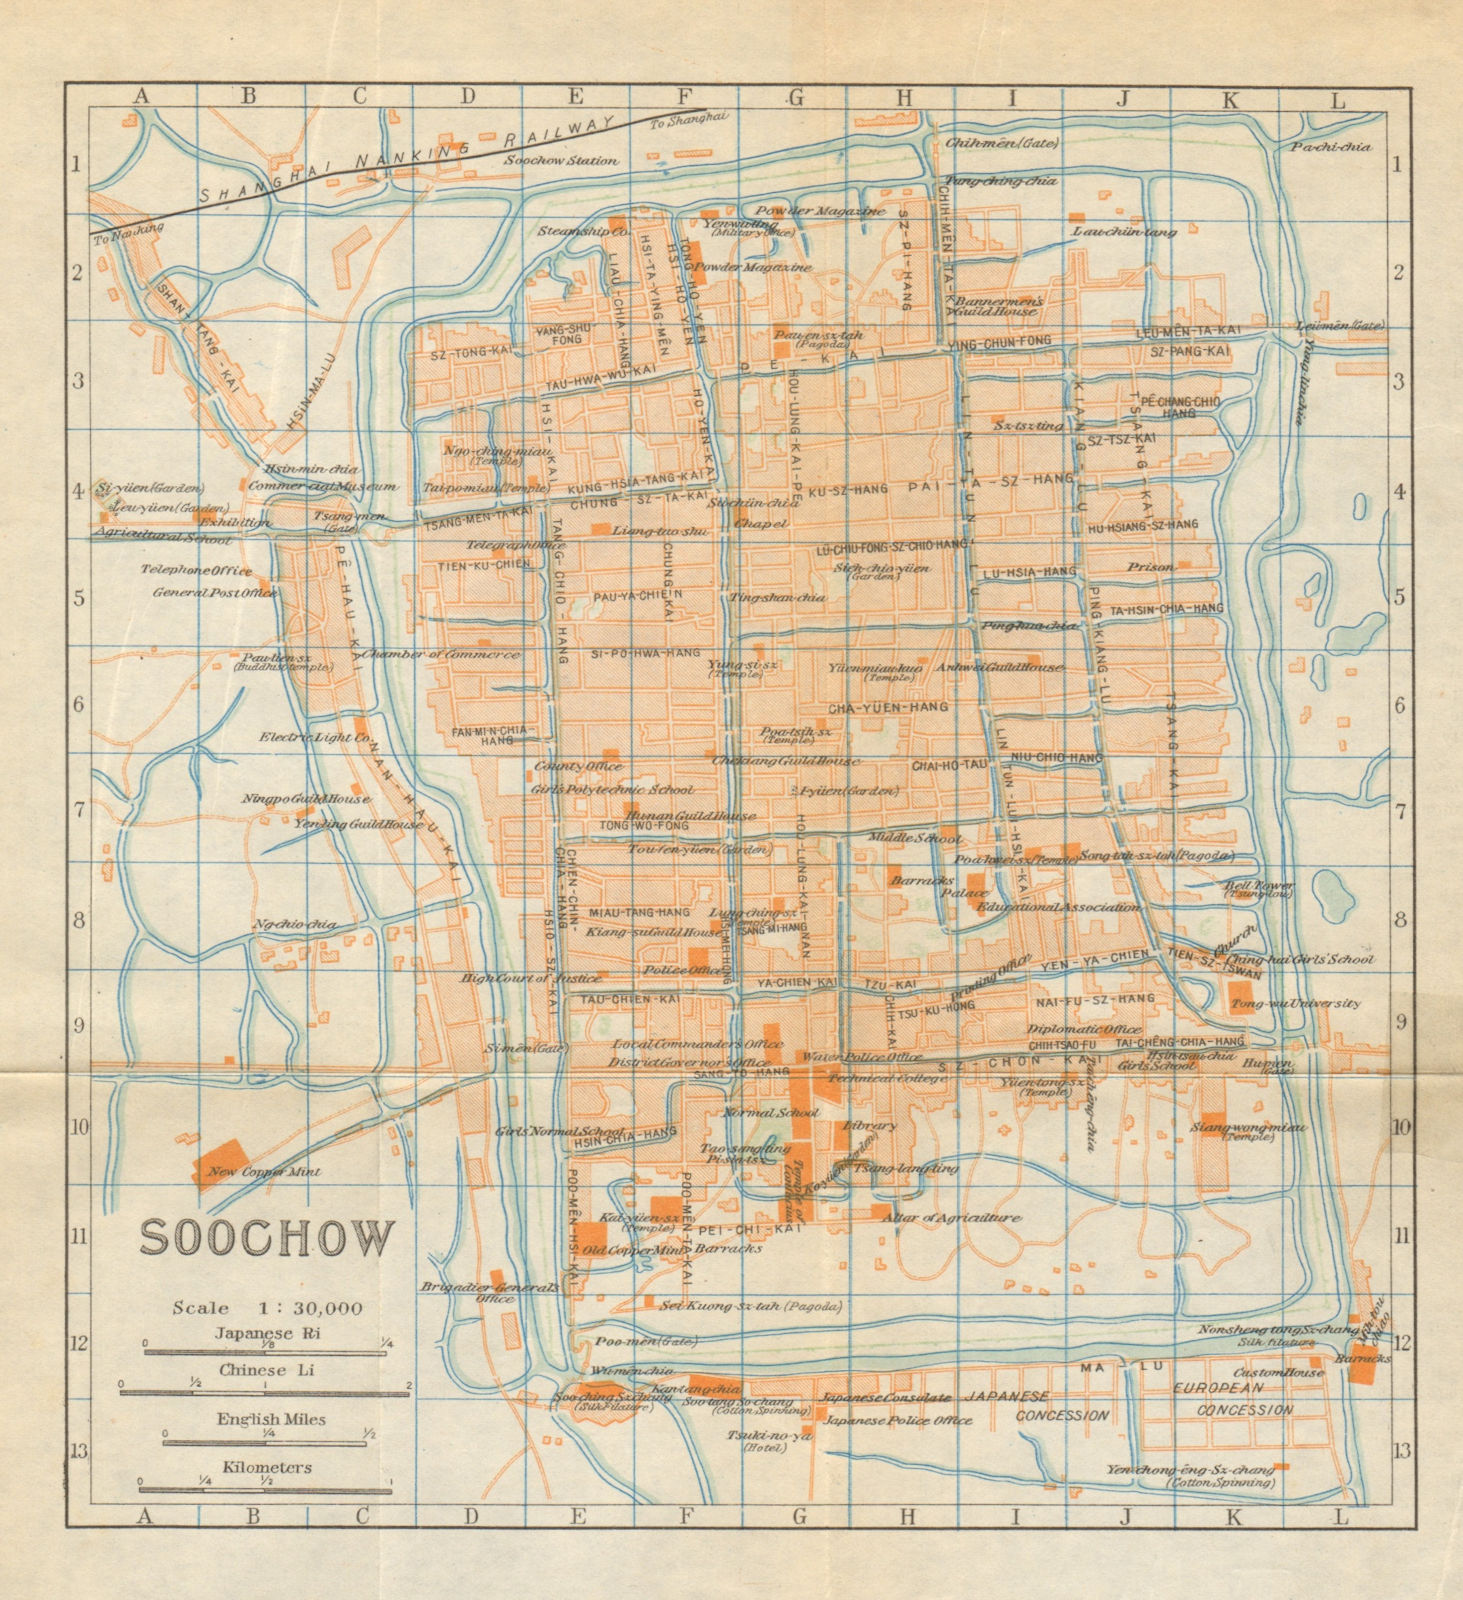 Associate Product 'Soochow'. Suzhou antique town city plan. China 1924 old map chart